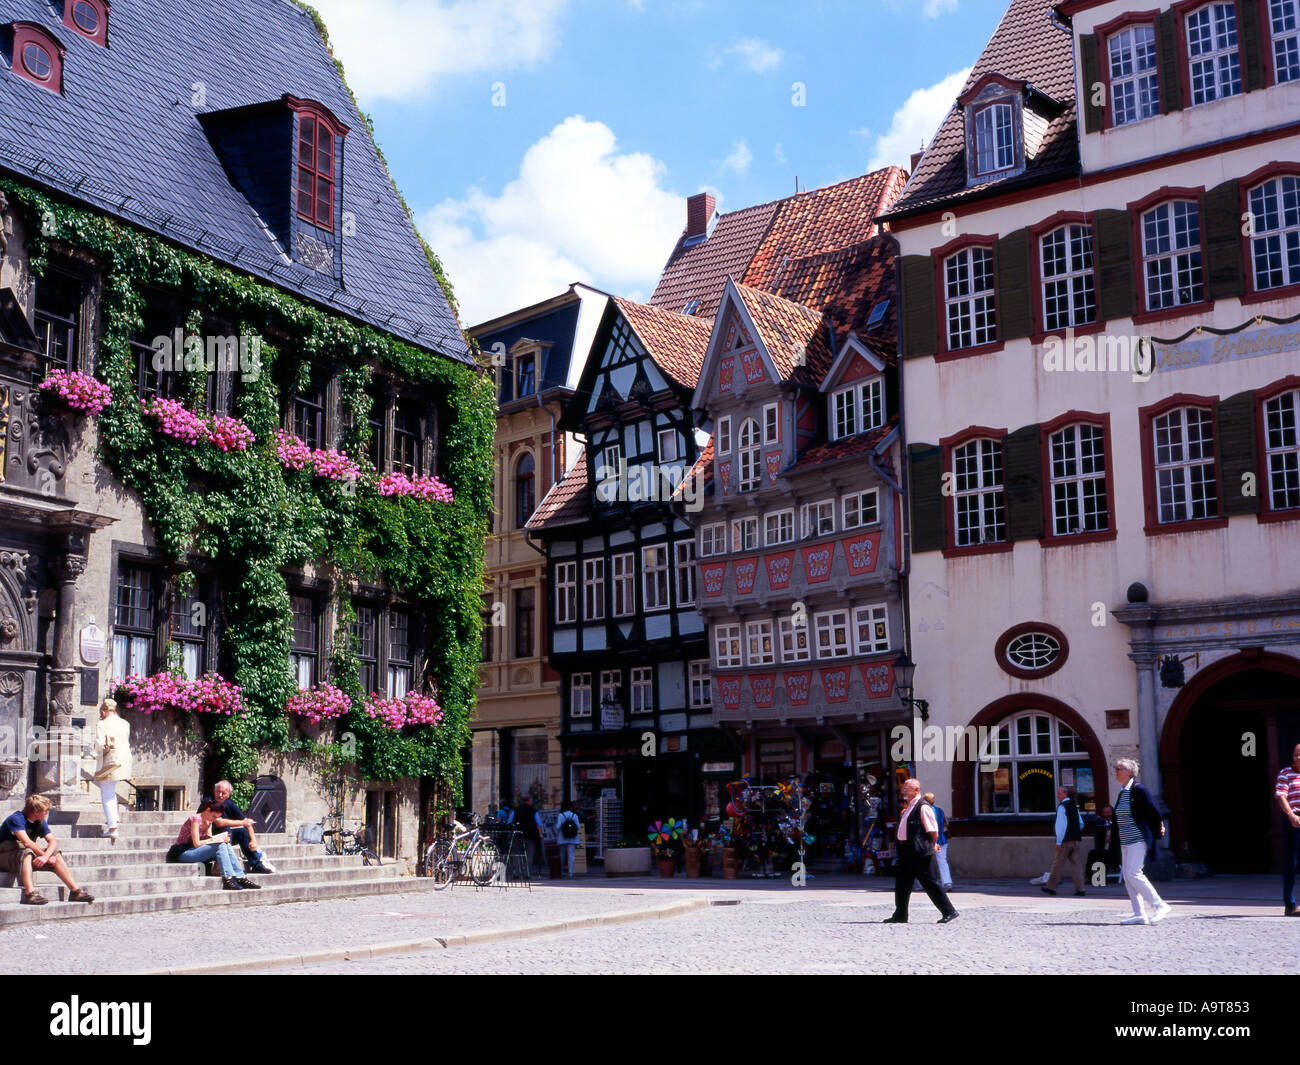 Town hall rathaus and half timbered buildings in the market place Quedlinburg Sachsen Anhalt Germany Stock Photo